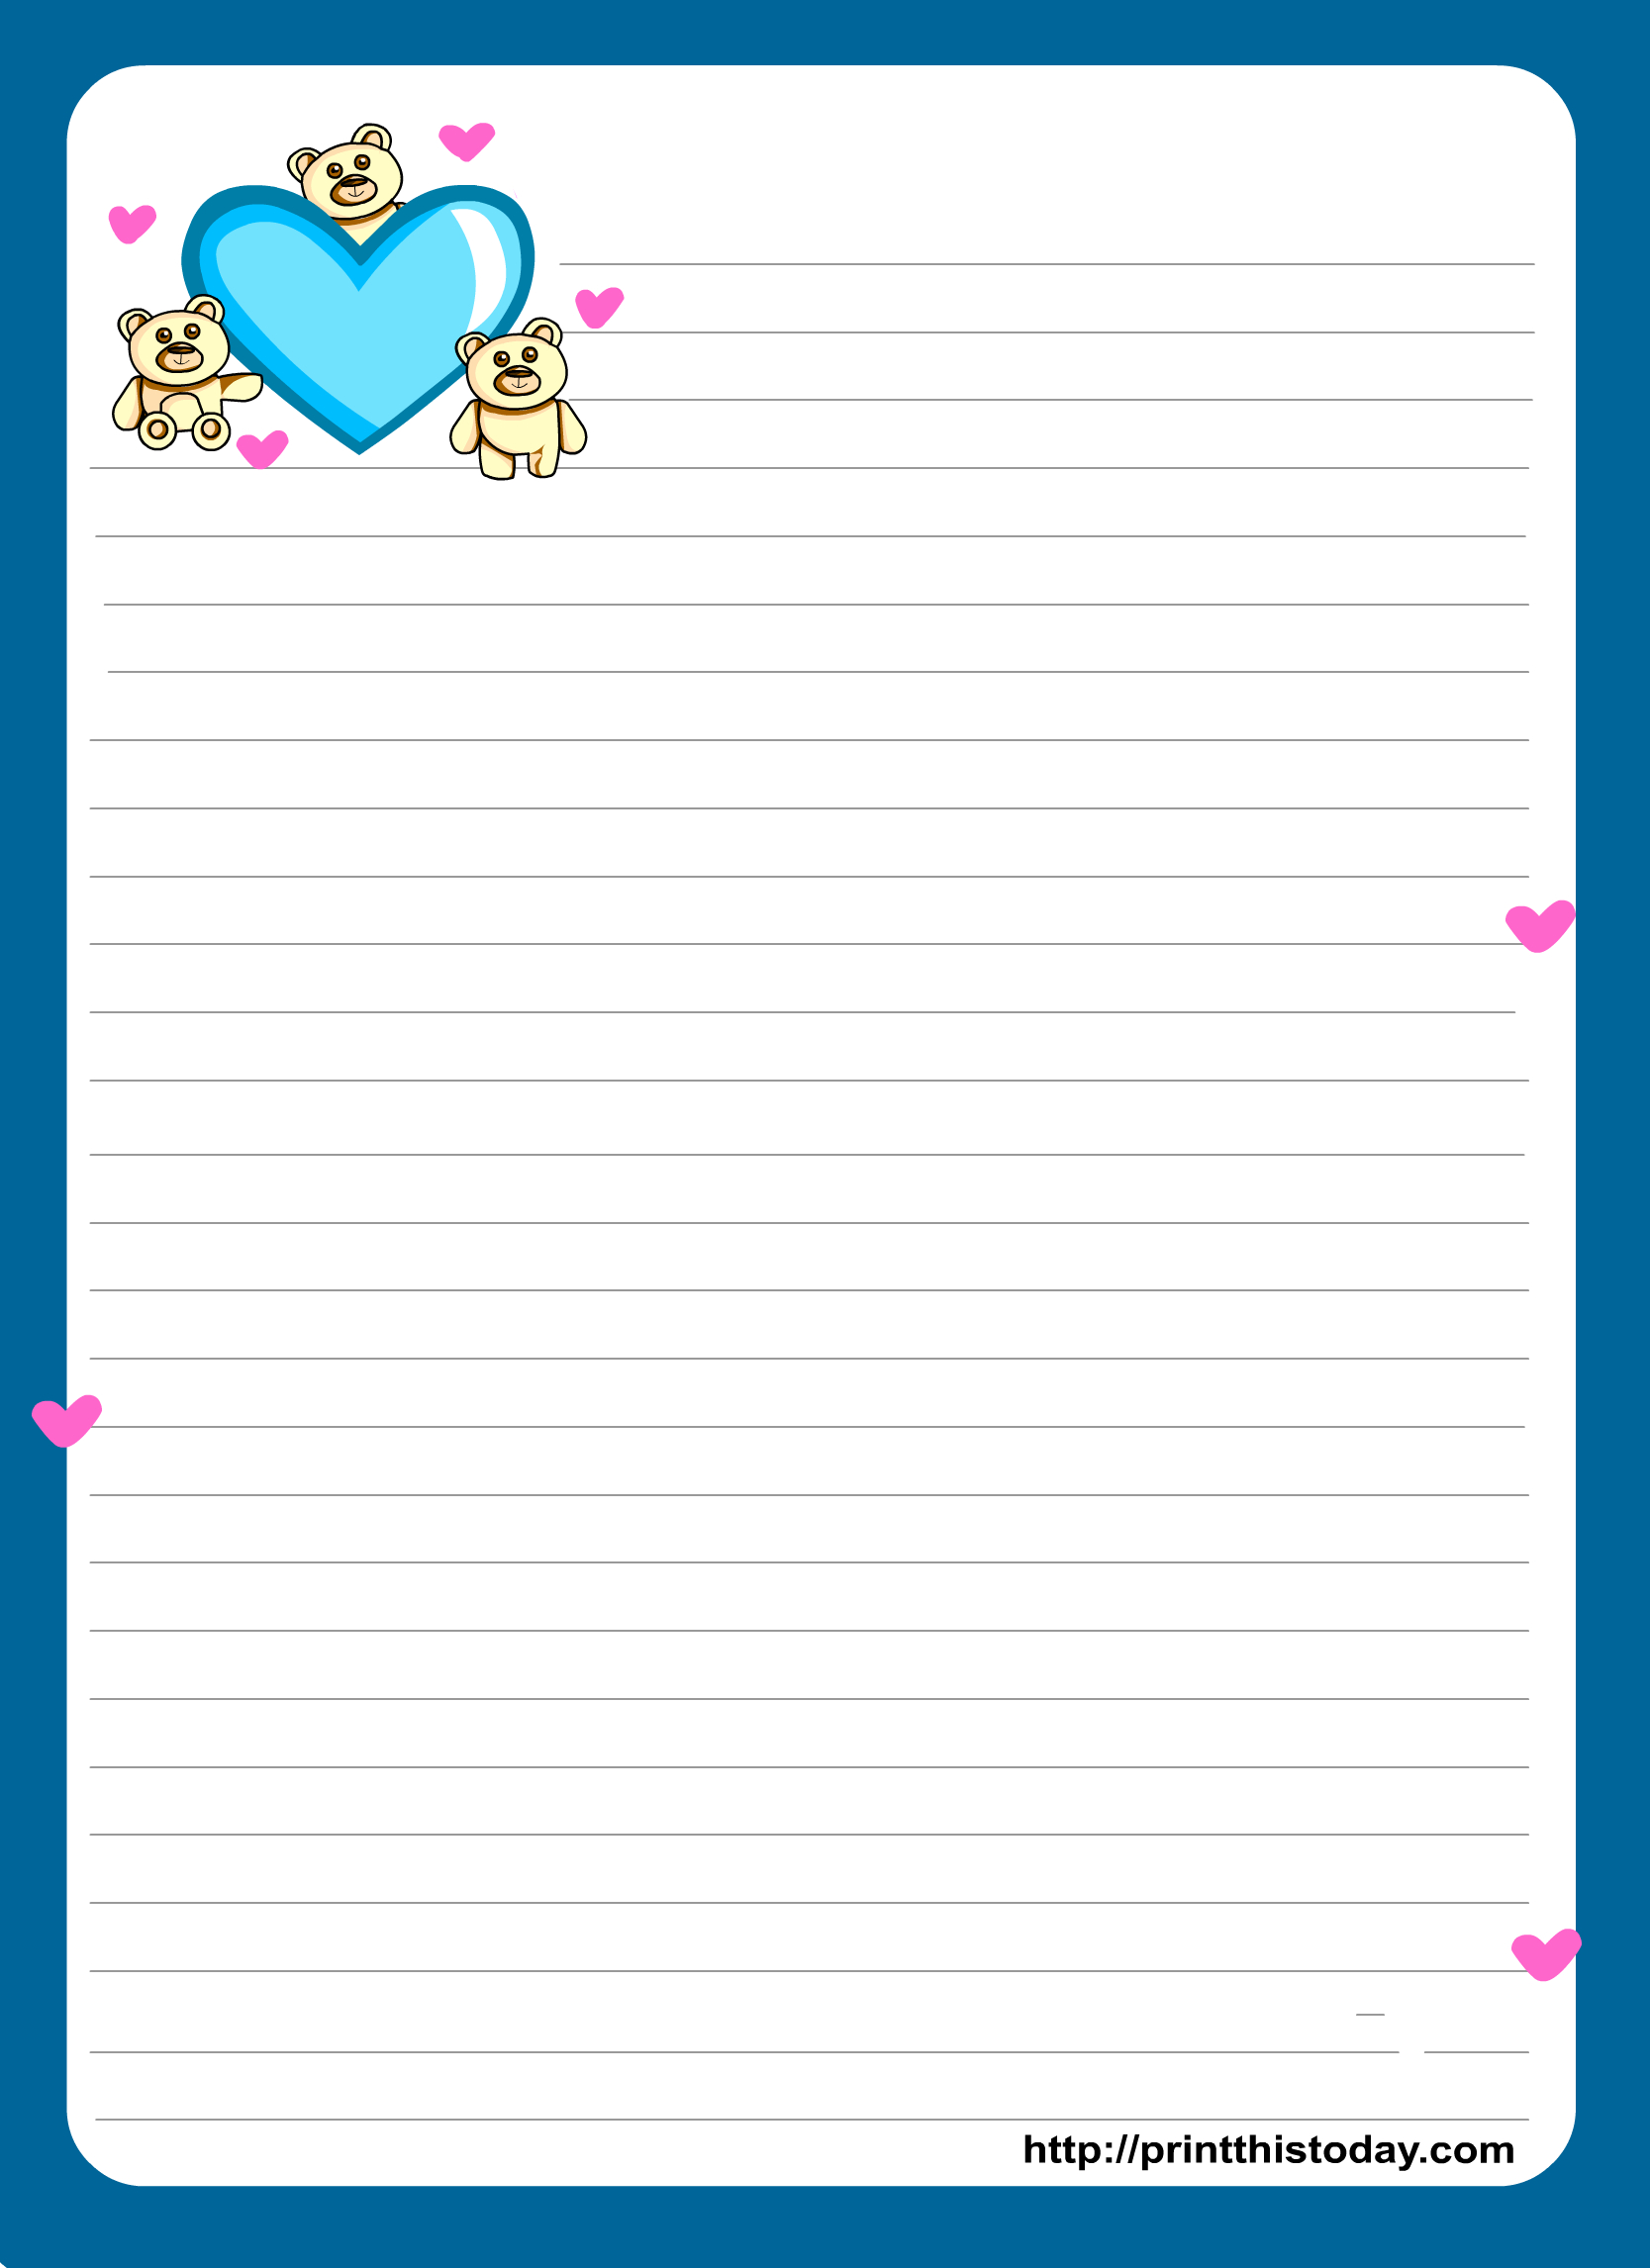 Miss You Love Letter Pad Stationery | Lined Stationery | Free - Free Printable Stationary Pdf